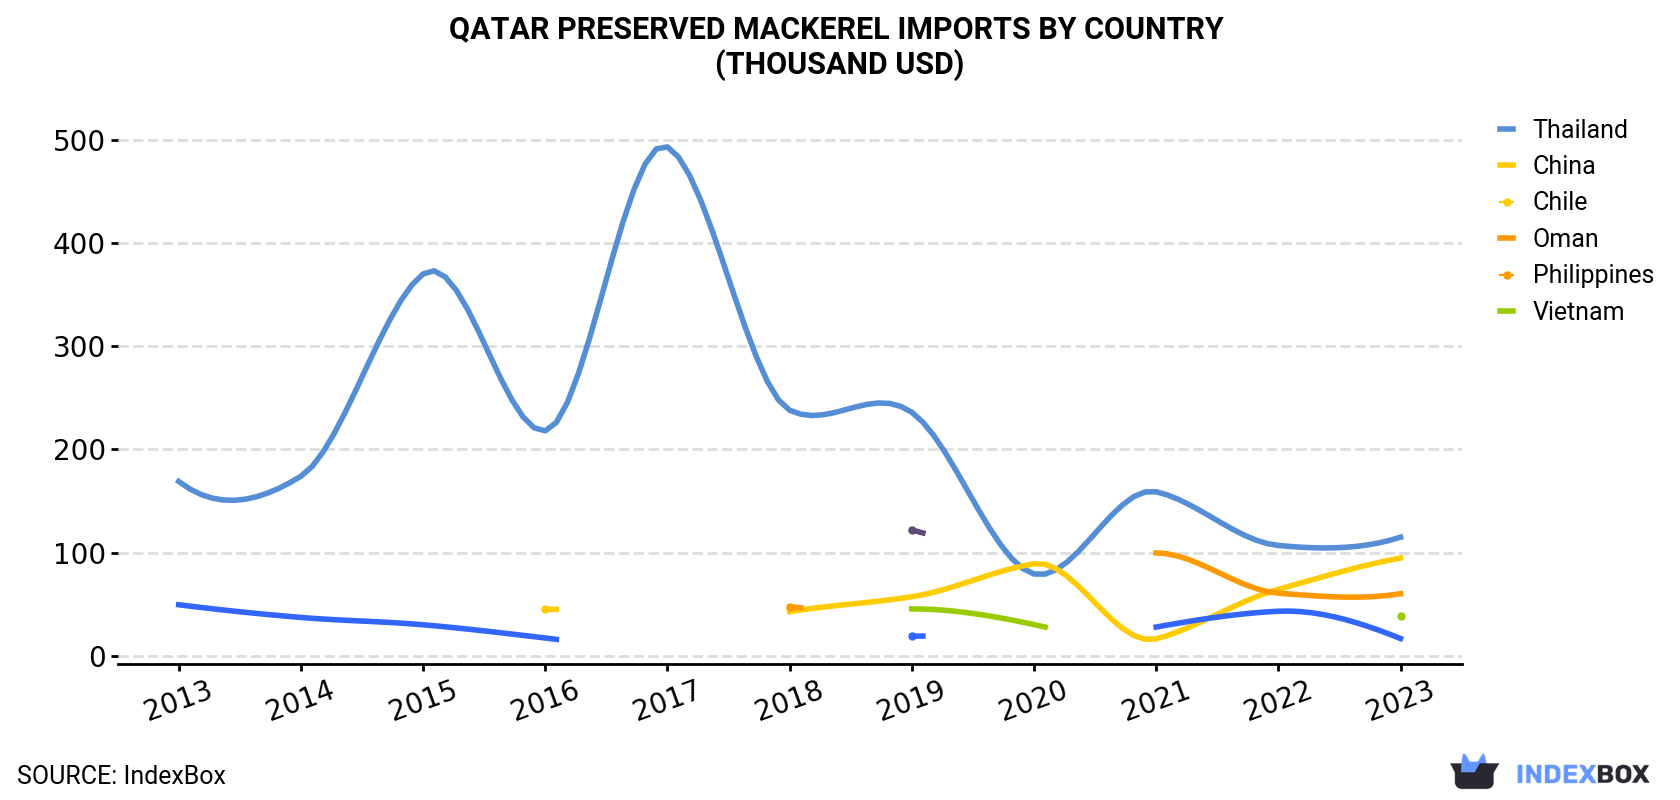 Qatar Preserved Mackerel Imports By Country (Thousand USD)